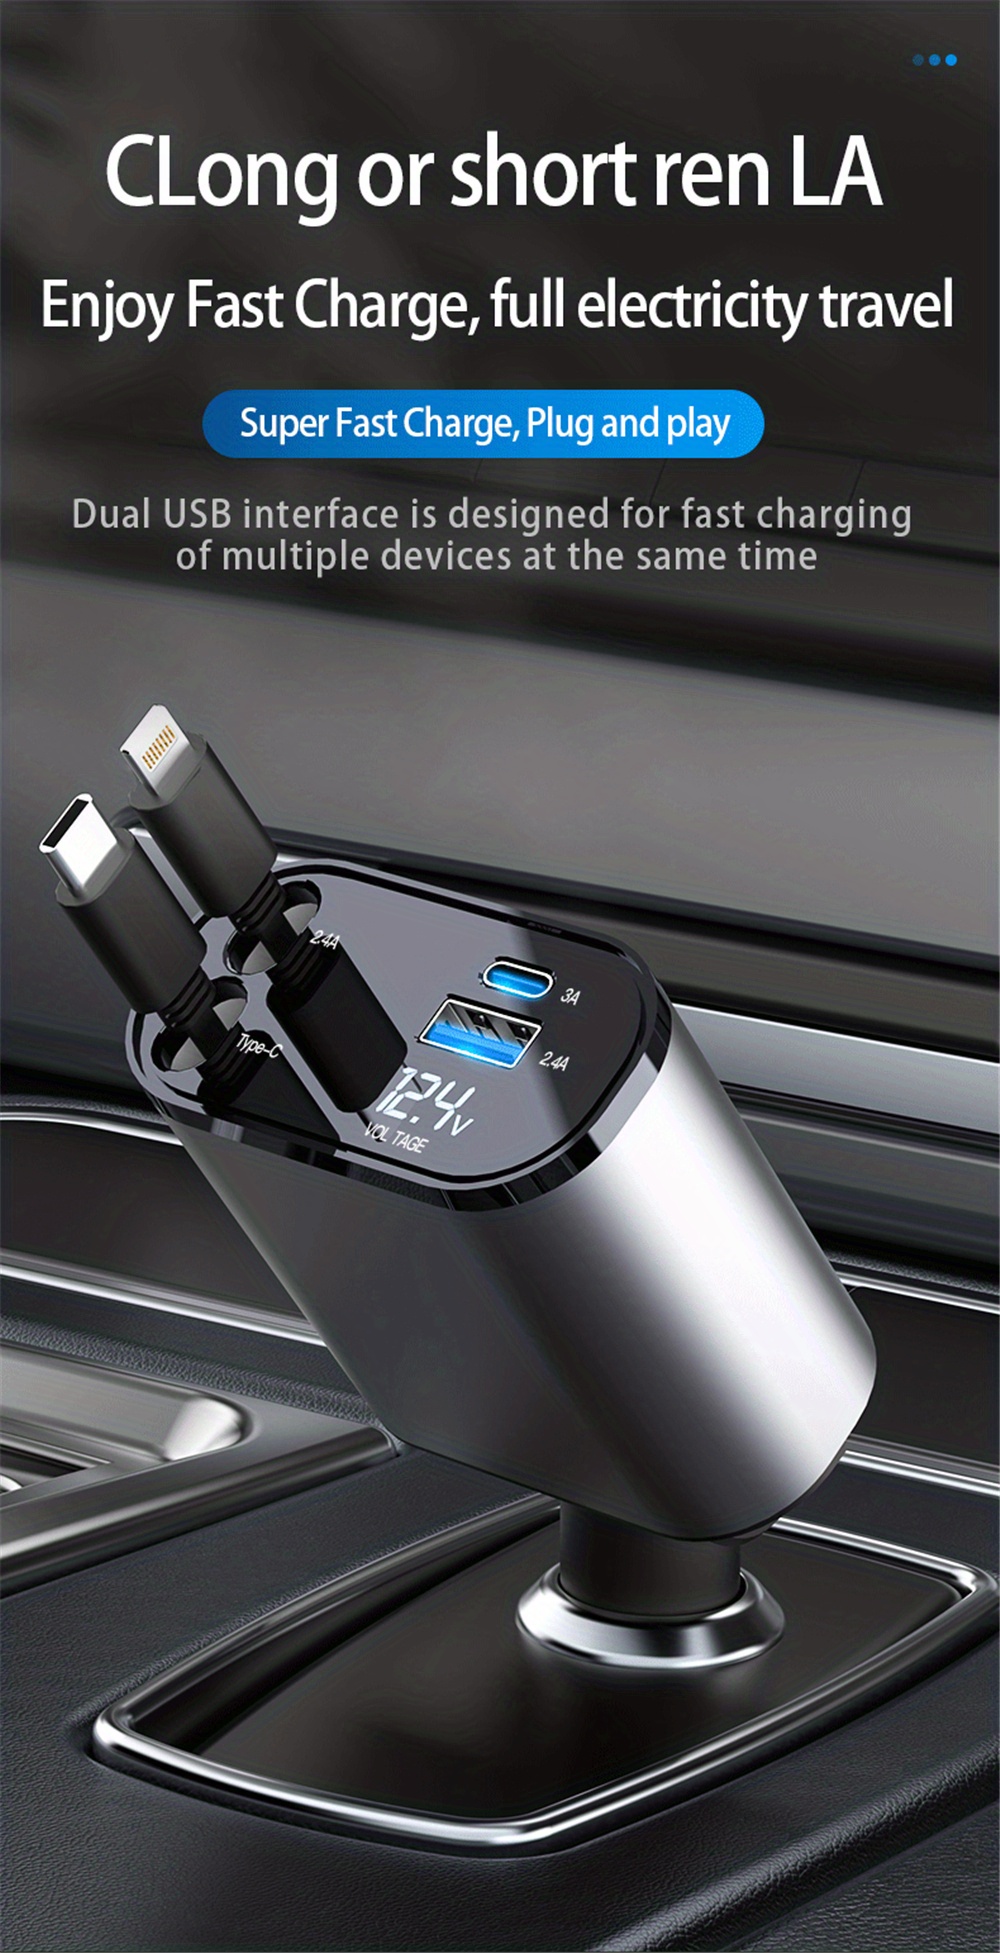 100w 4 in 1 car charger comes with retractable cable digital display fast charging usb type c for iphone xiaomi samsung adjustable cord cigarette lighter adapter details 0